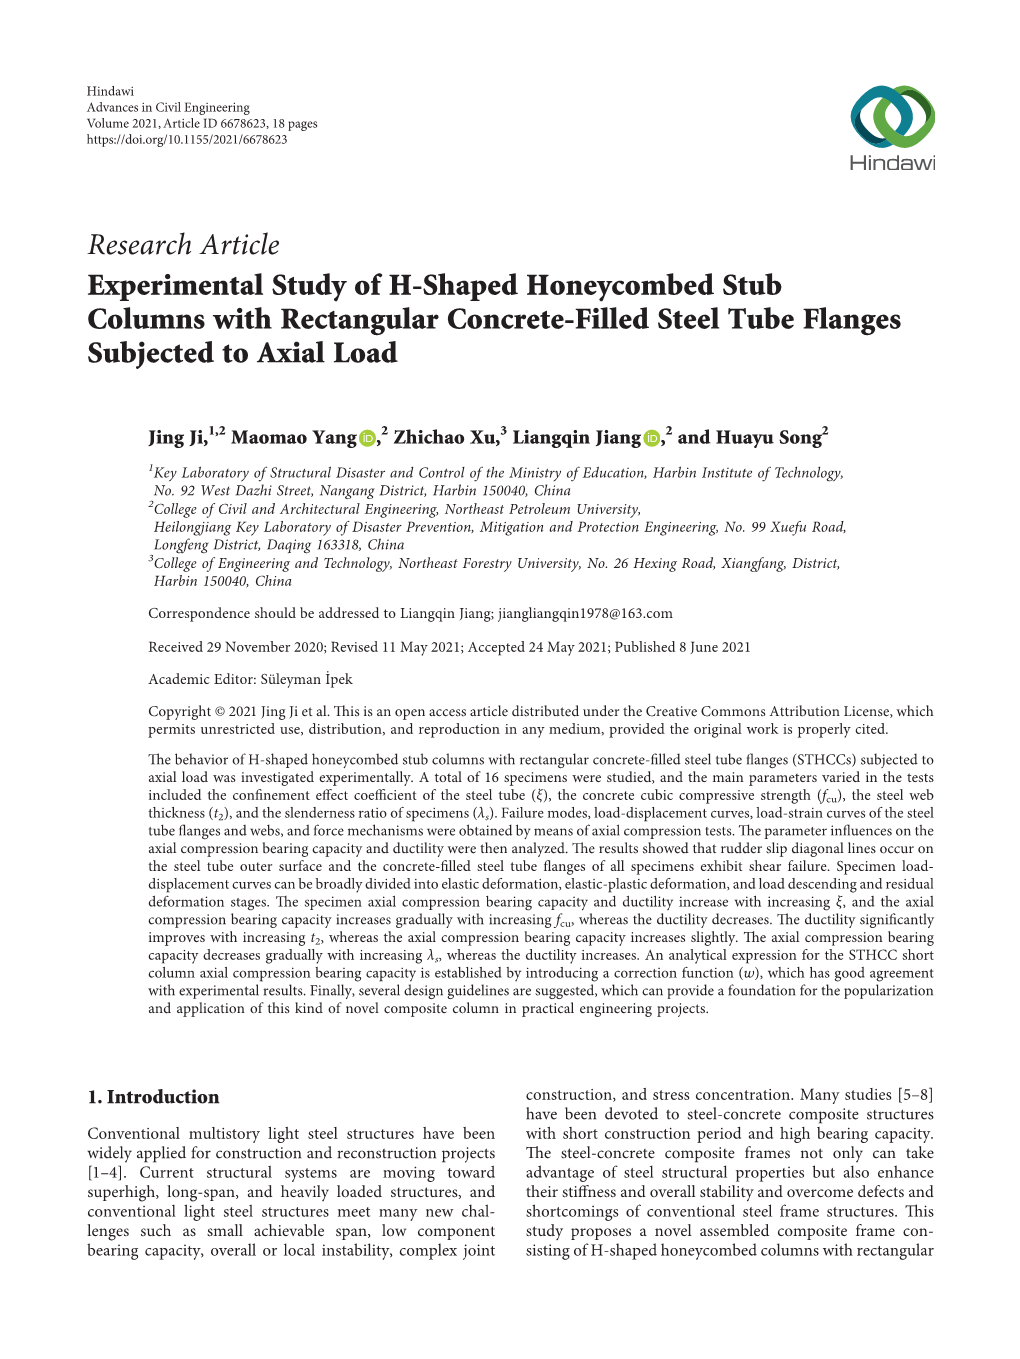 Experimental Study of H-Shaped Honeycombed Stub Columns with Rectangular Concrete-Filled Steel Tube Flanges Subjected to Axial Load